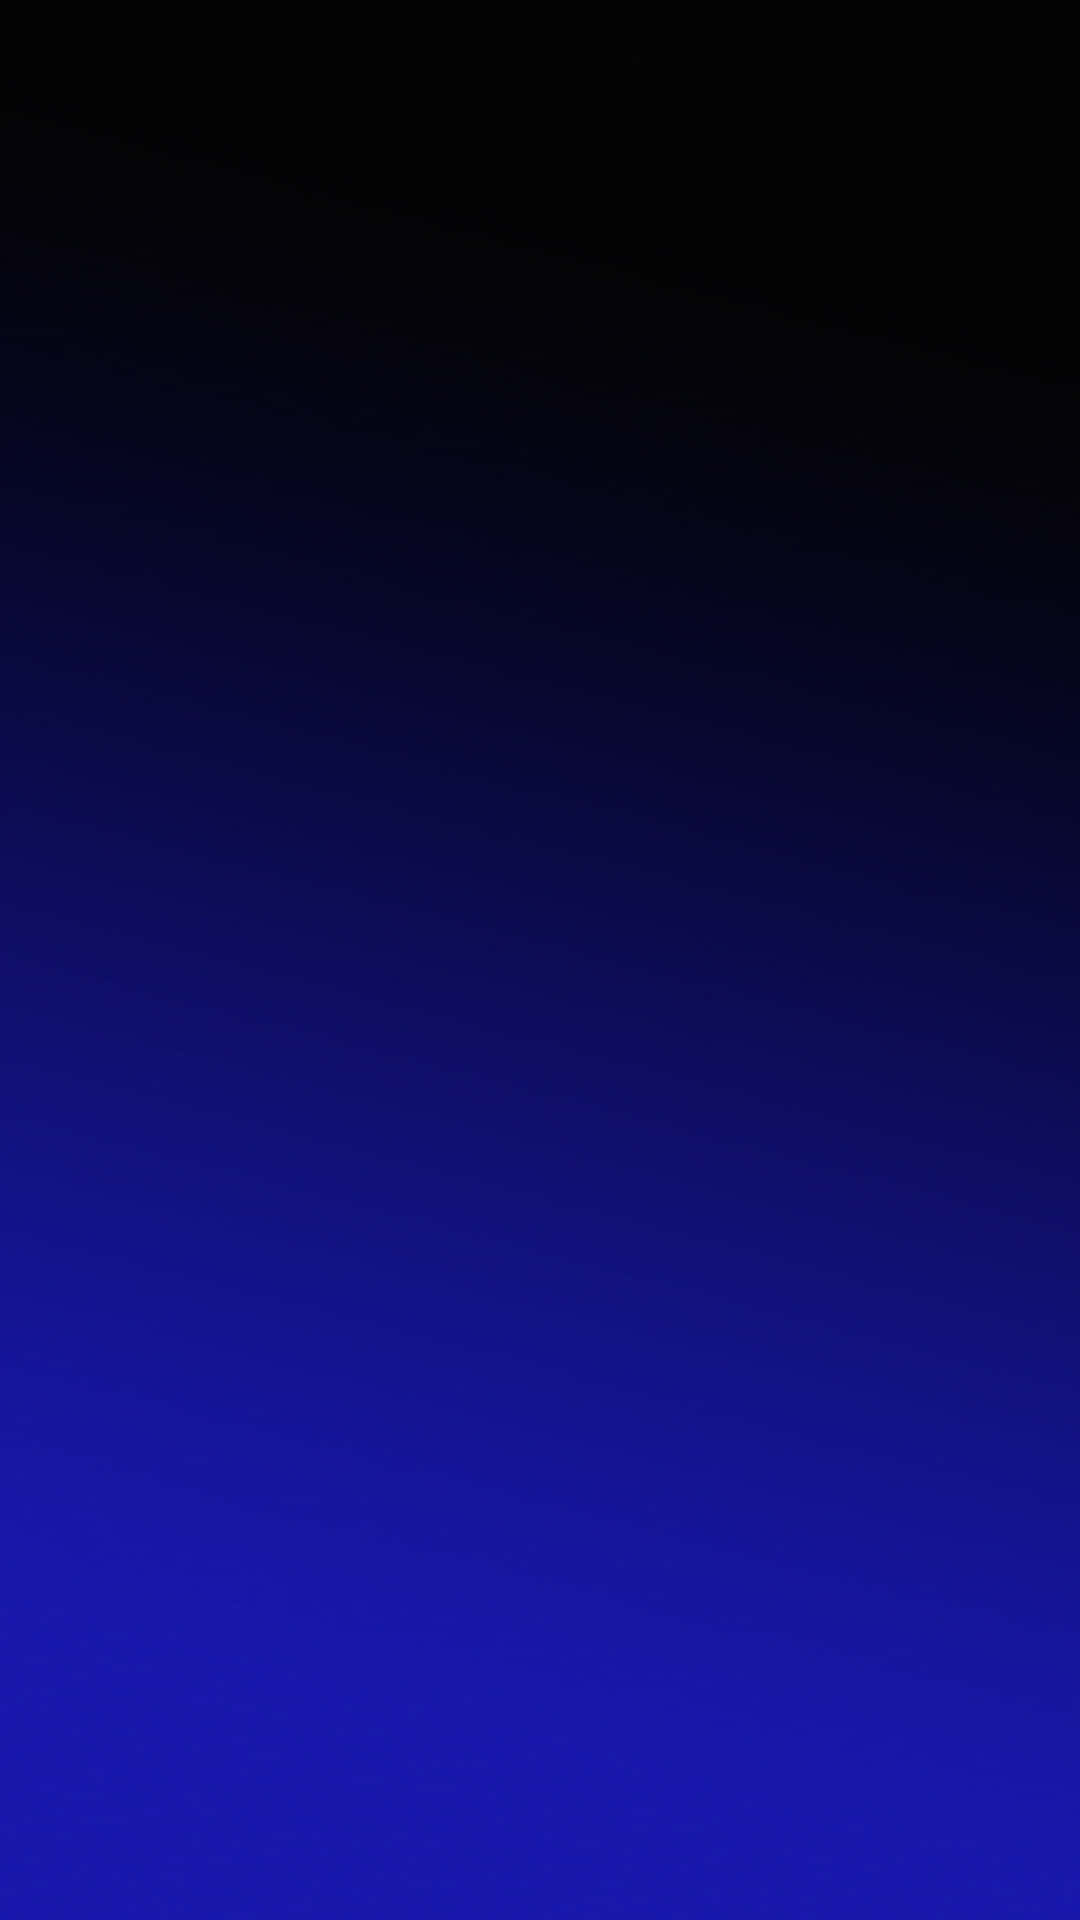 Abstract Twilight Blues: A Merged Spectrum Of Black And Blue Background